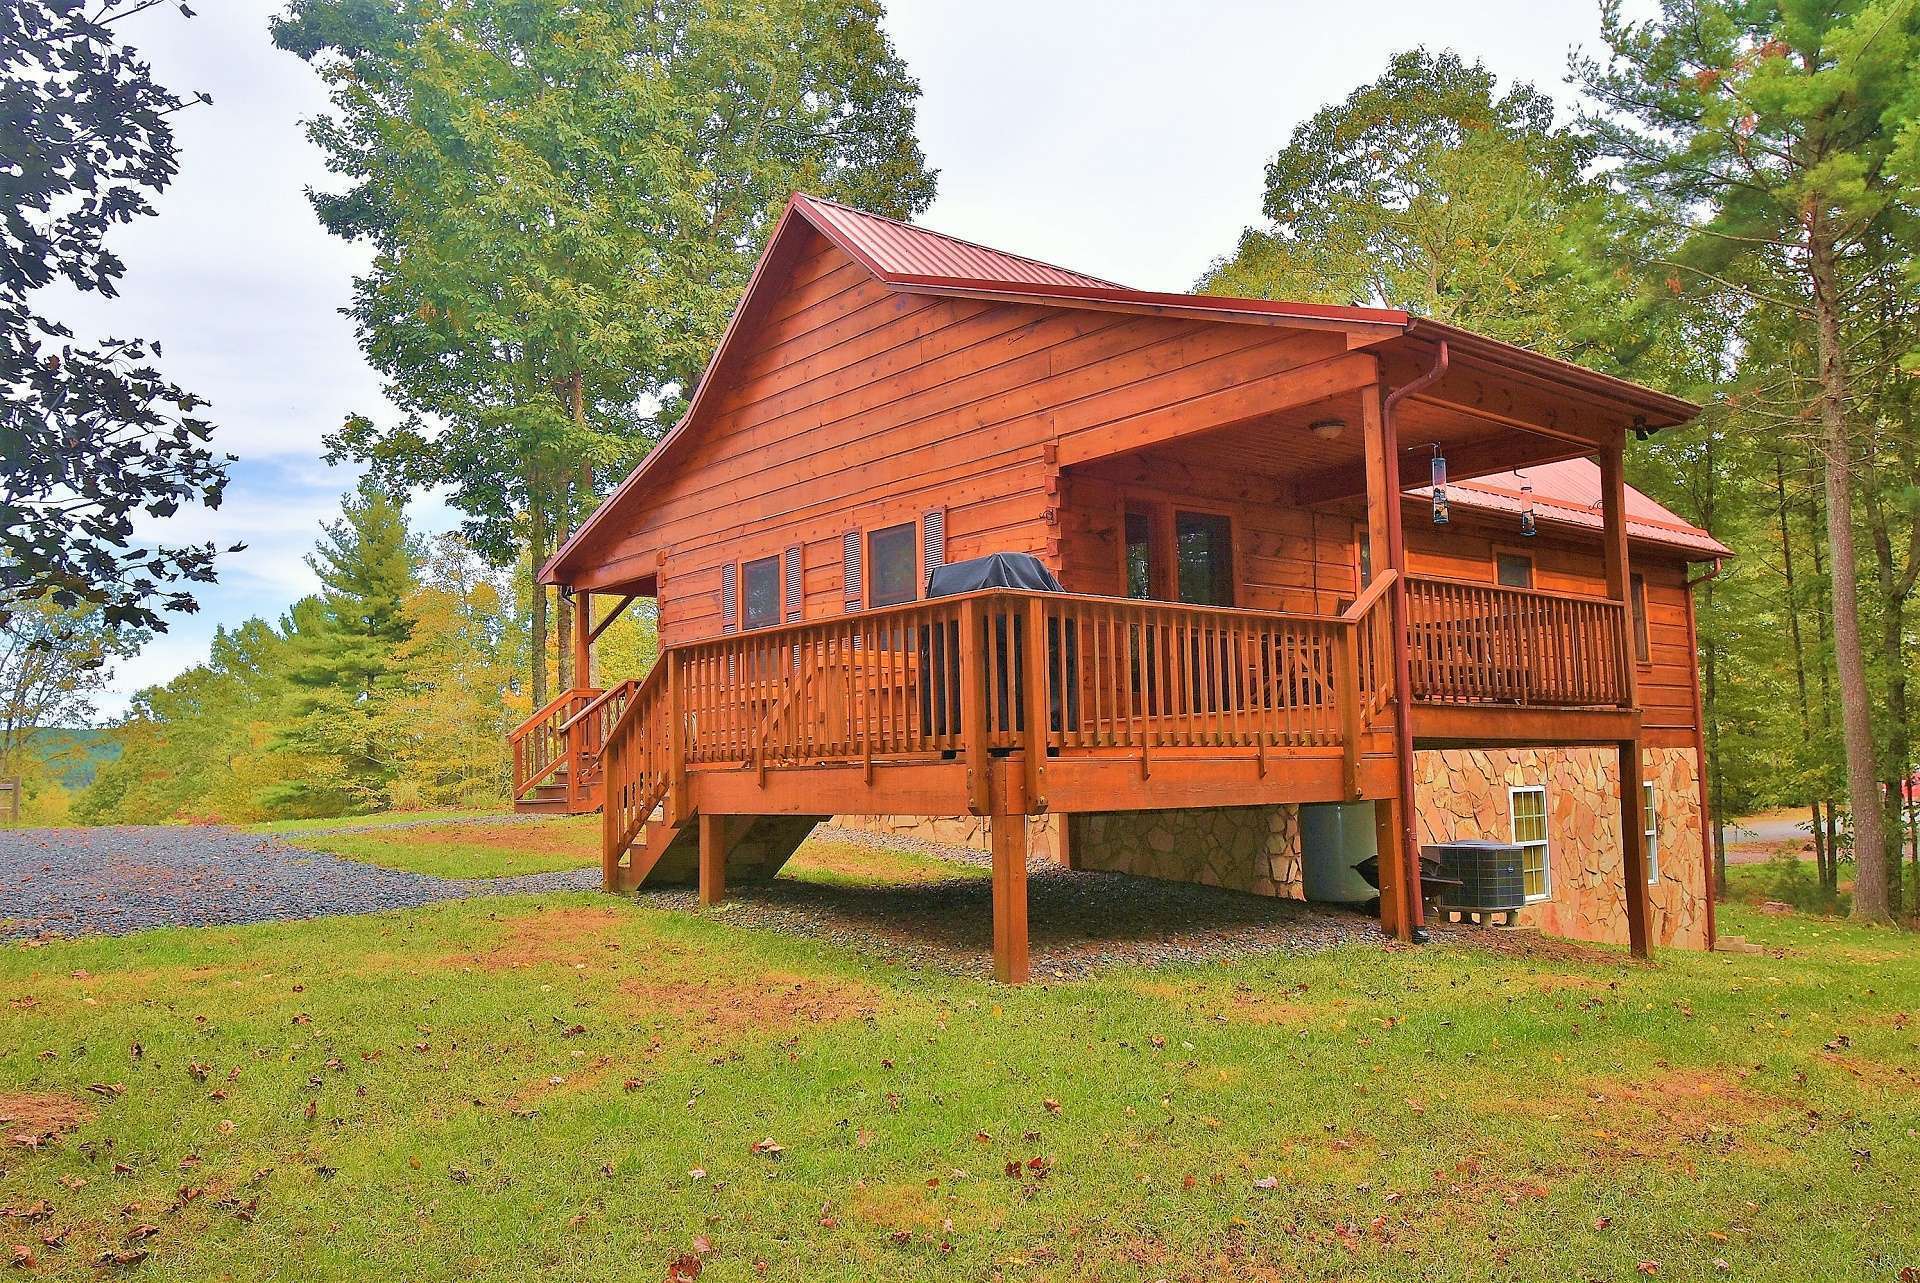 The cabin is nicely sited on the lot and offers plenty of room for landscaping, gardening, and play.